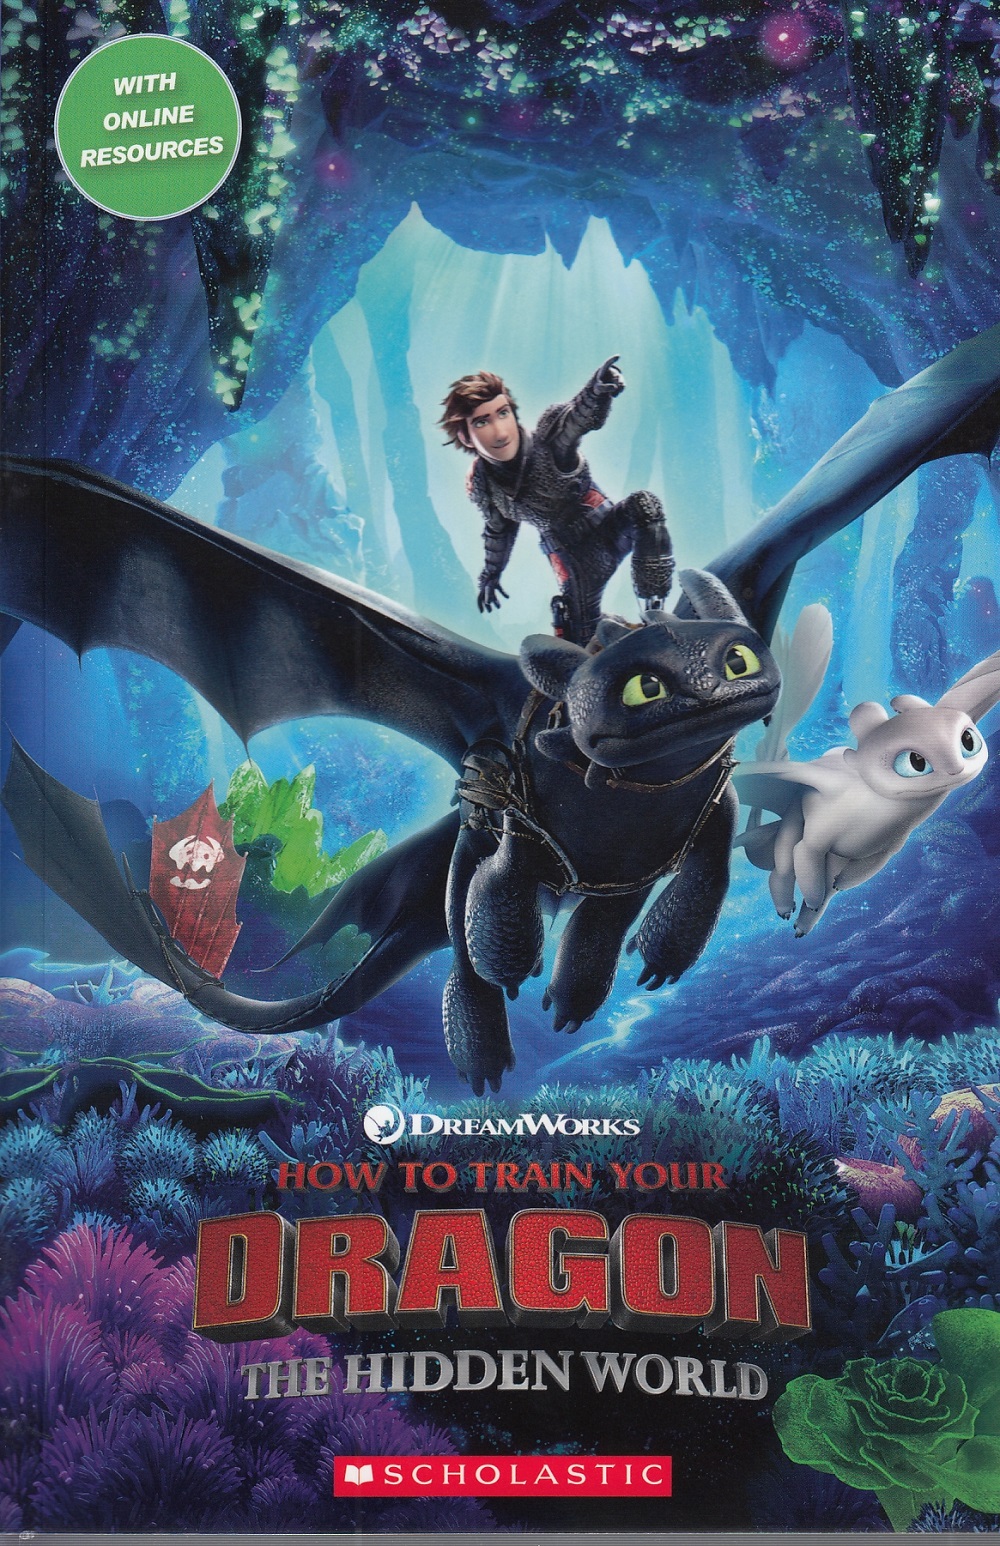 POPCORN READERS 3:HOW TO TRAIN YOUR DRAGON:THE HIDDEN WORLD